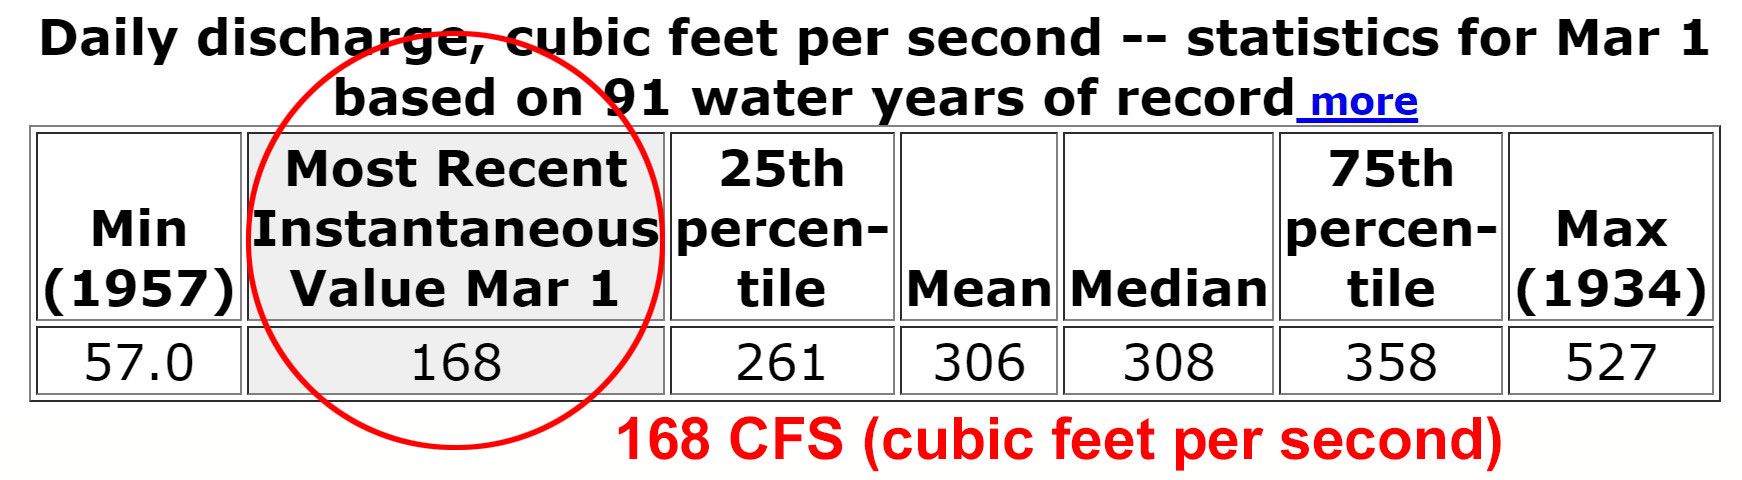 Comal River Flows / USGS Discharge from Comal Springs in CFS (cubic feet per second)